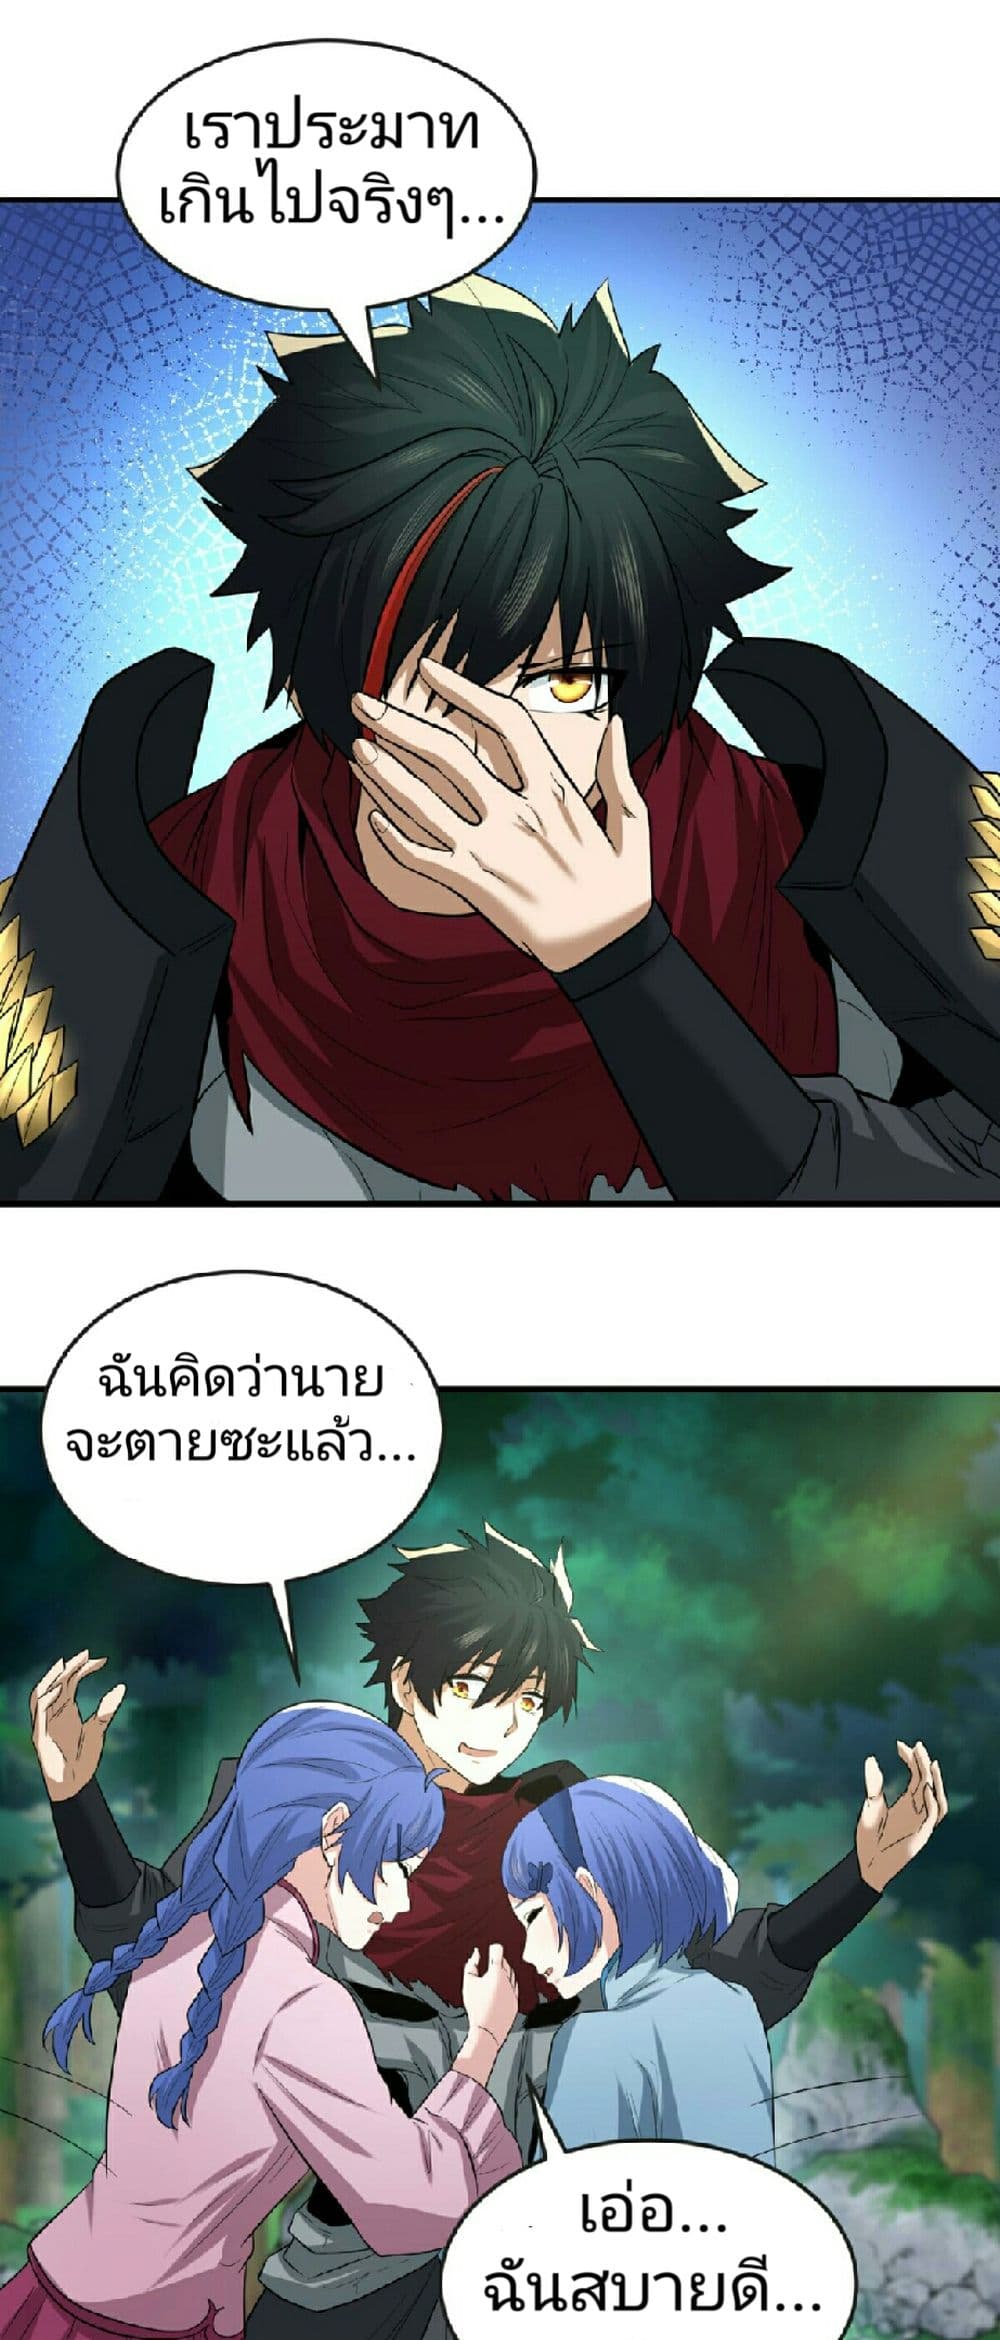 The Age of Ghost Spirits à¸à¸­à¸à¸à¸µà¹ 50 (27)